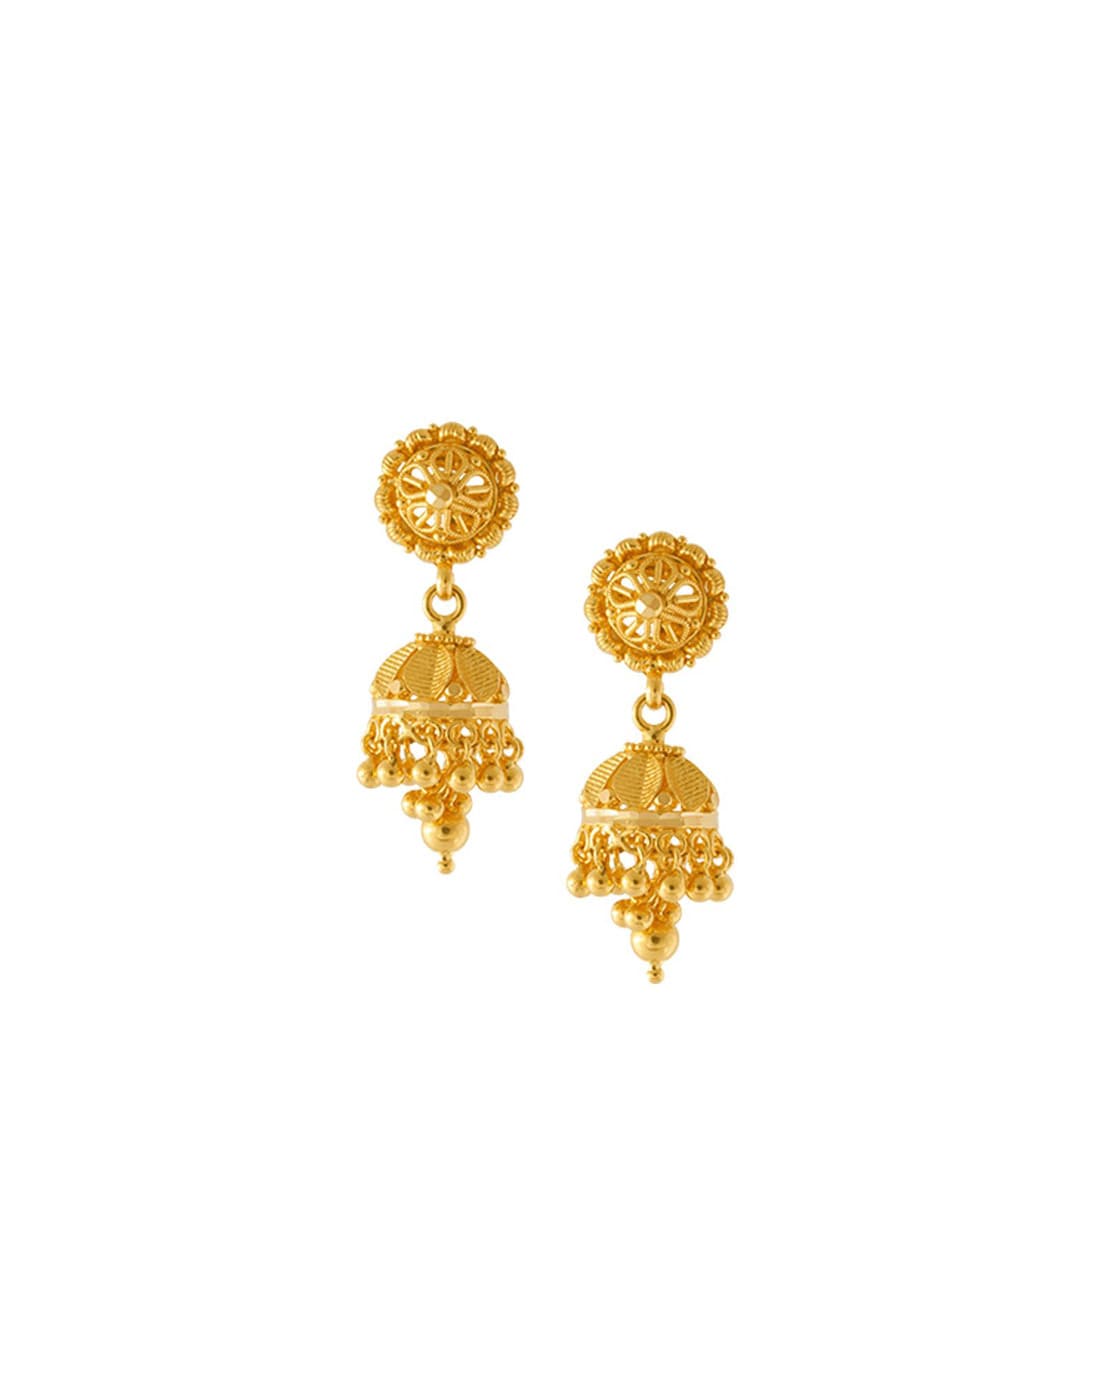 Buy PC Chandra Jewellers 22k Gold Earrings for Women Online At Best Price   Tata CLiQ